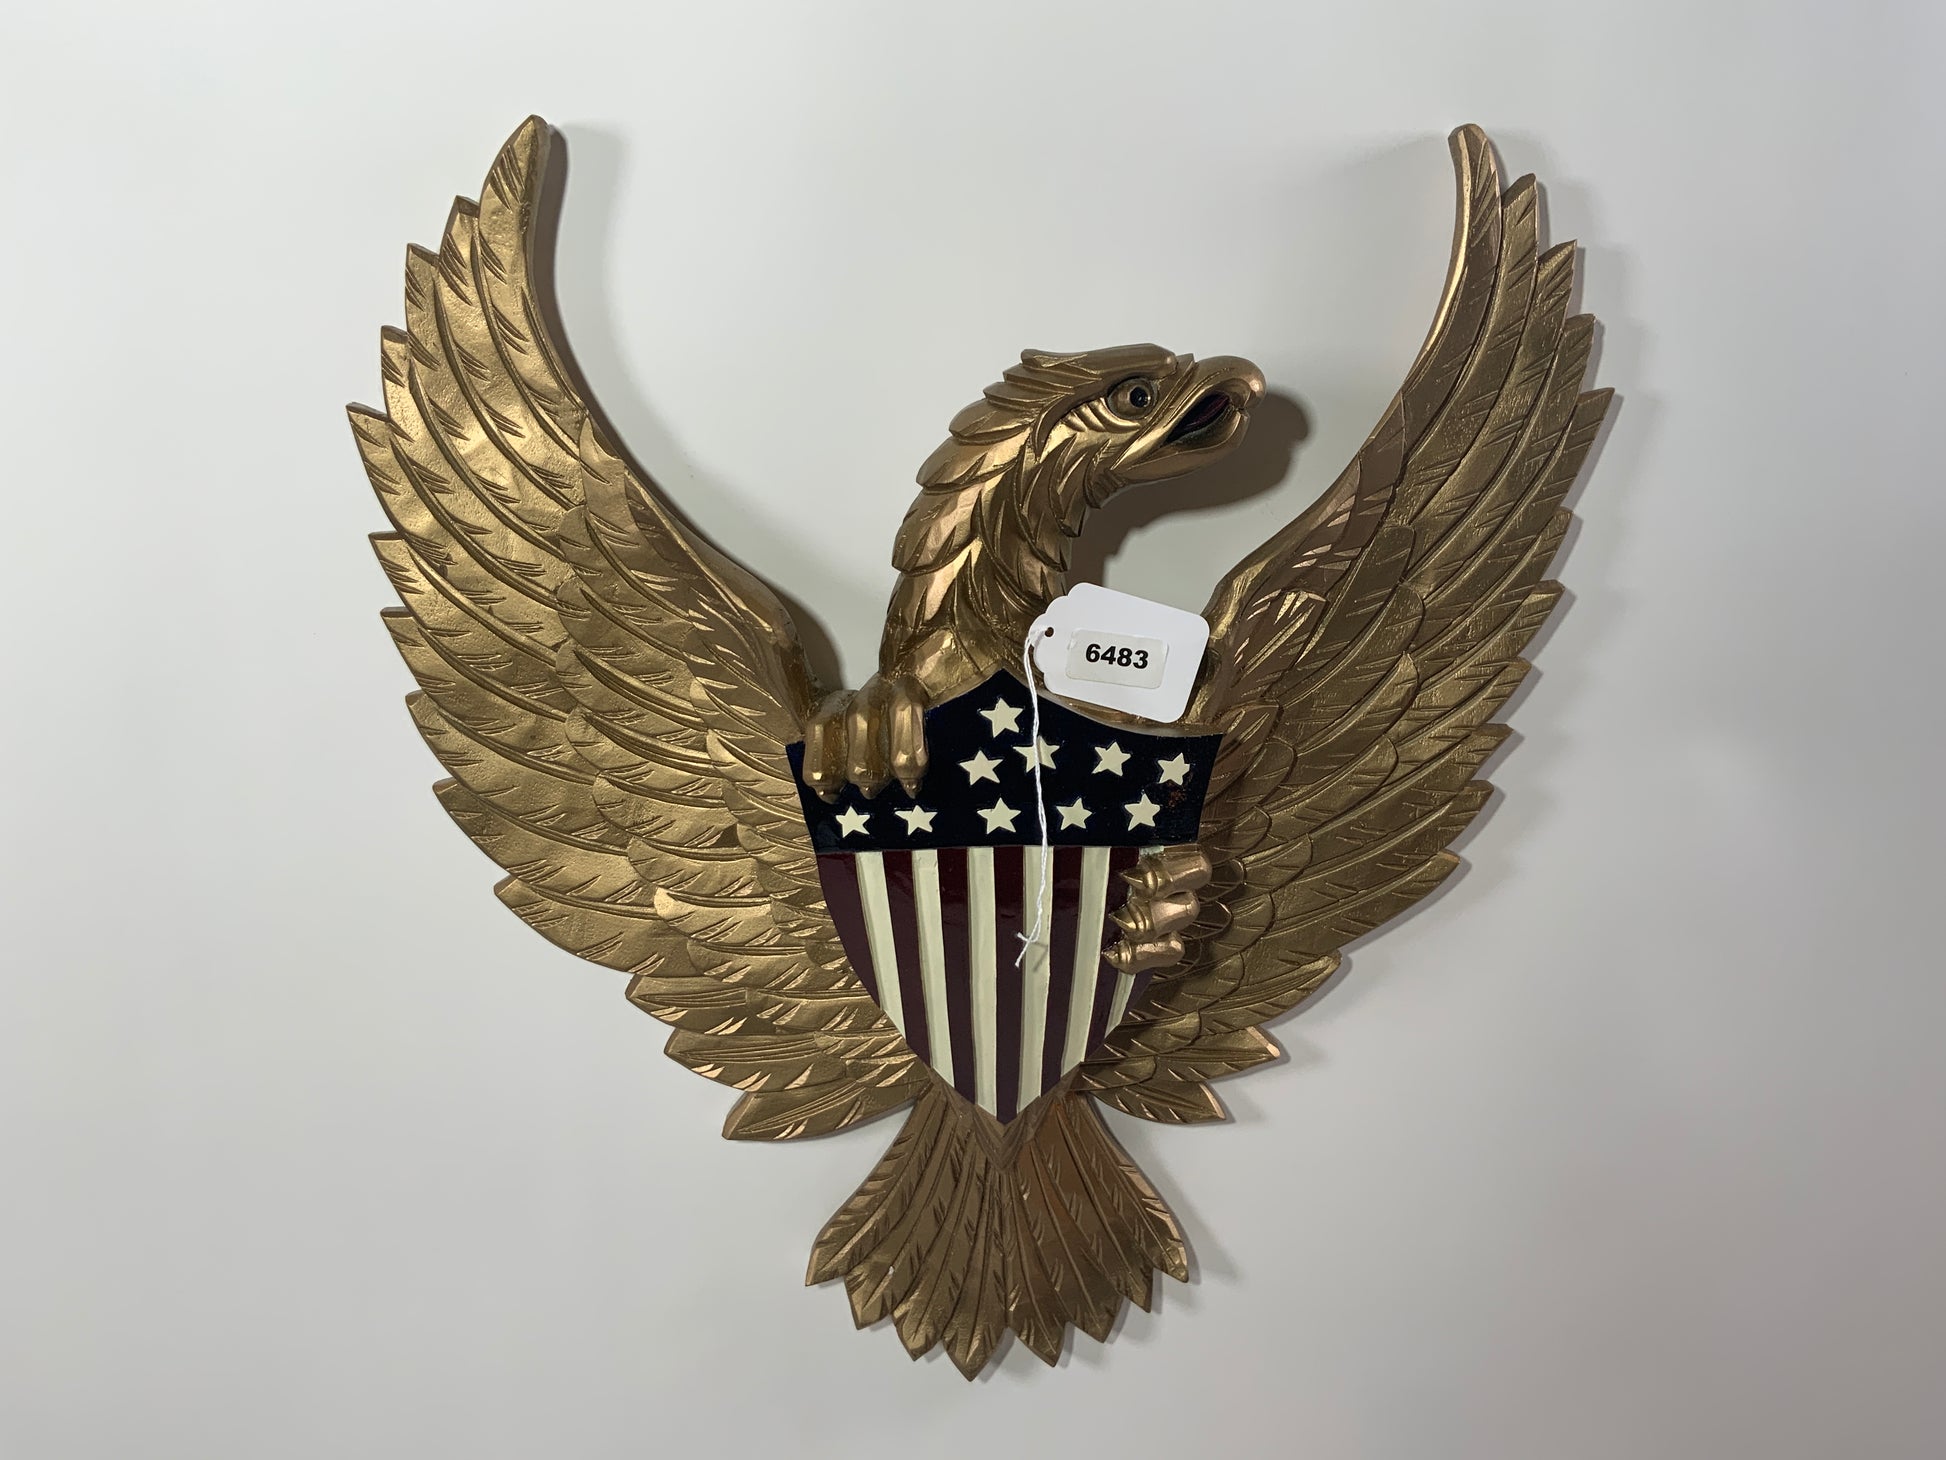 Carved Wood American Eagle With Gold Finish - Lannan Gallery